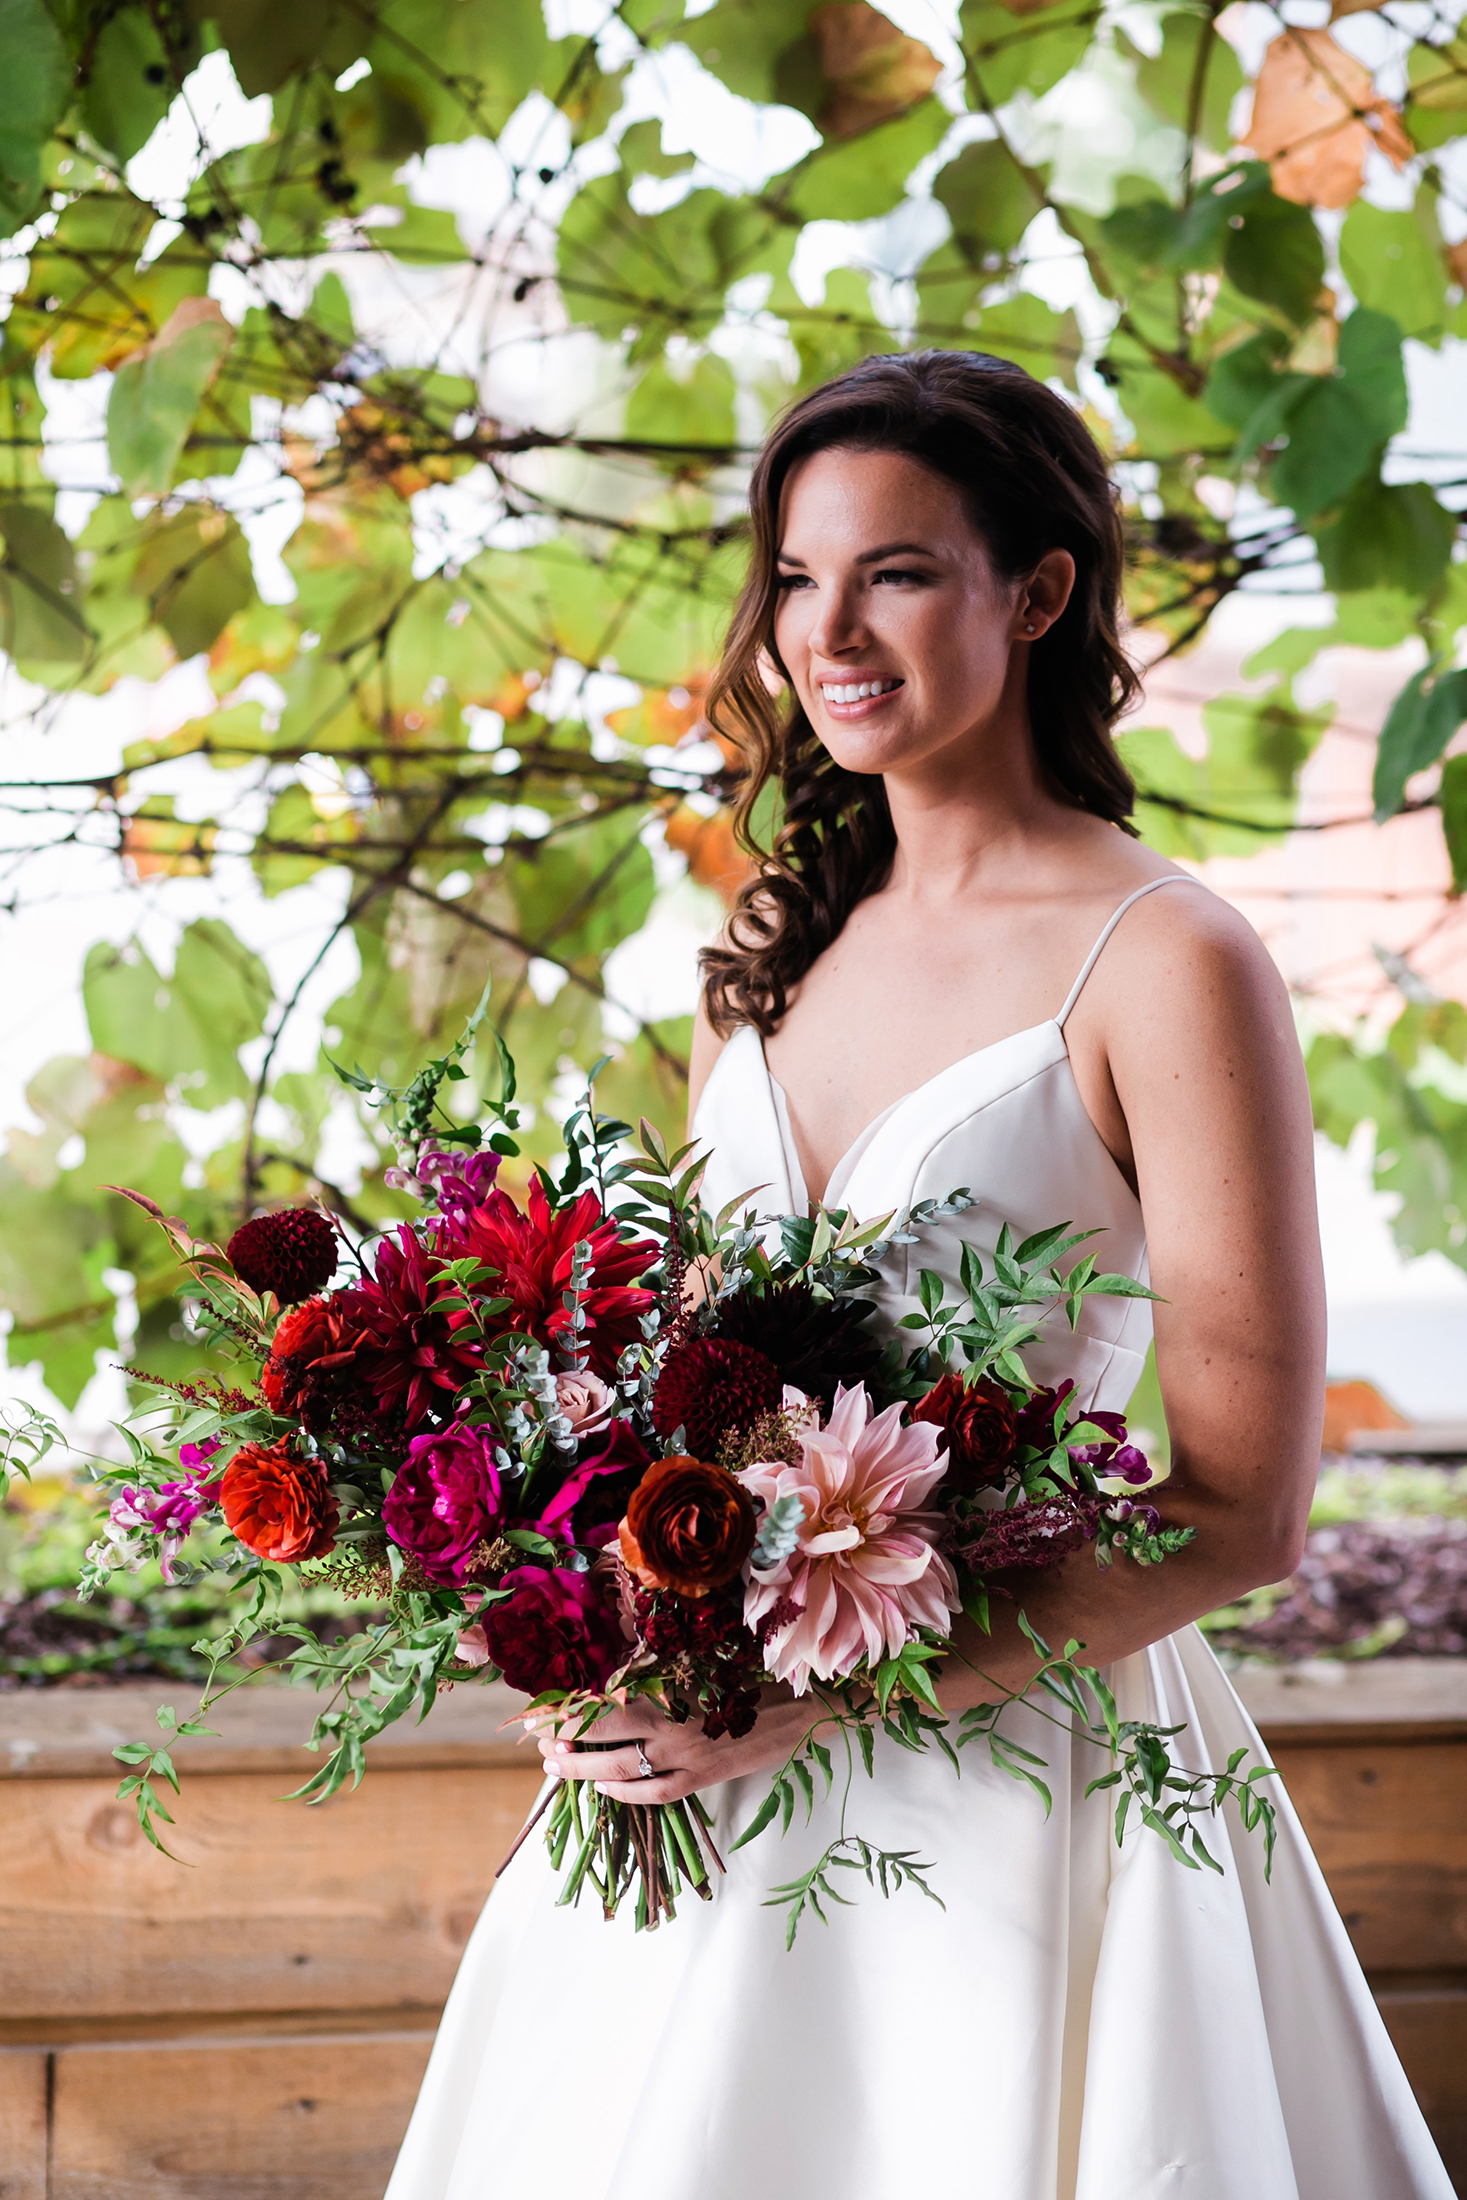 Burgundy and blush bridal bouquet with dahlias, garden roses, and greenery // Tennessee Wedding Floral Design